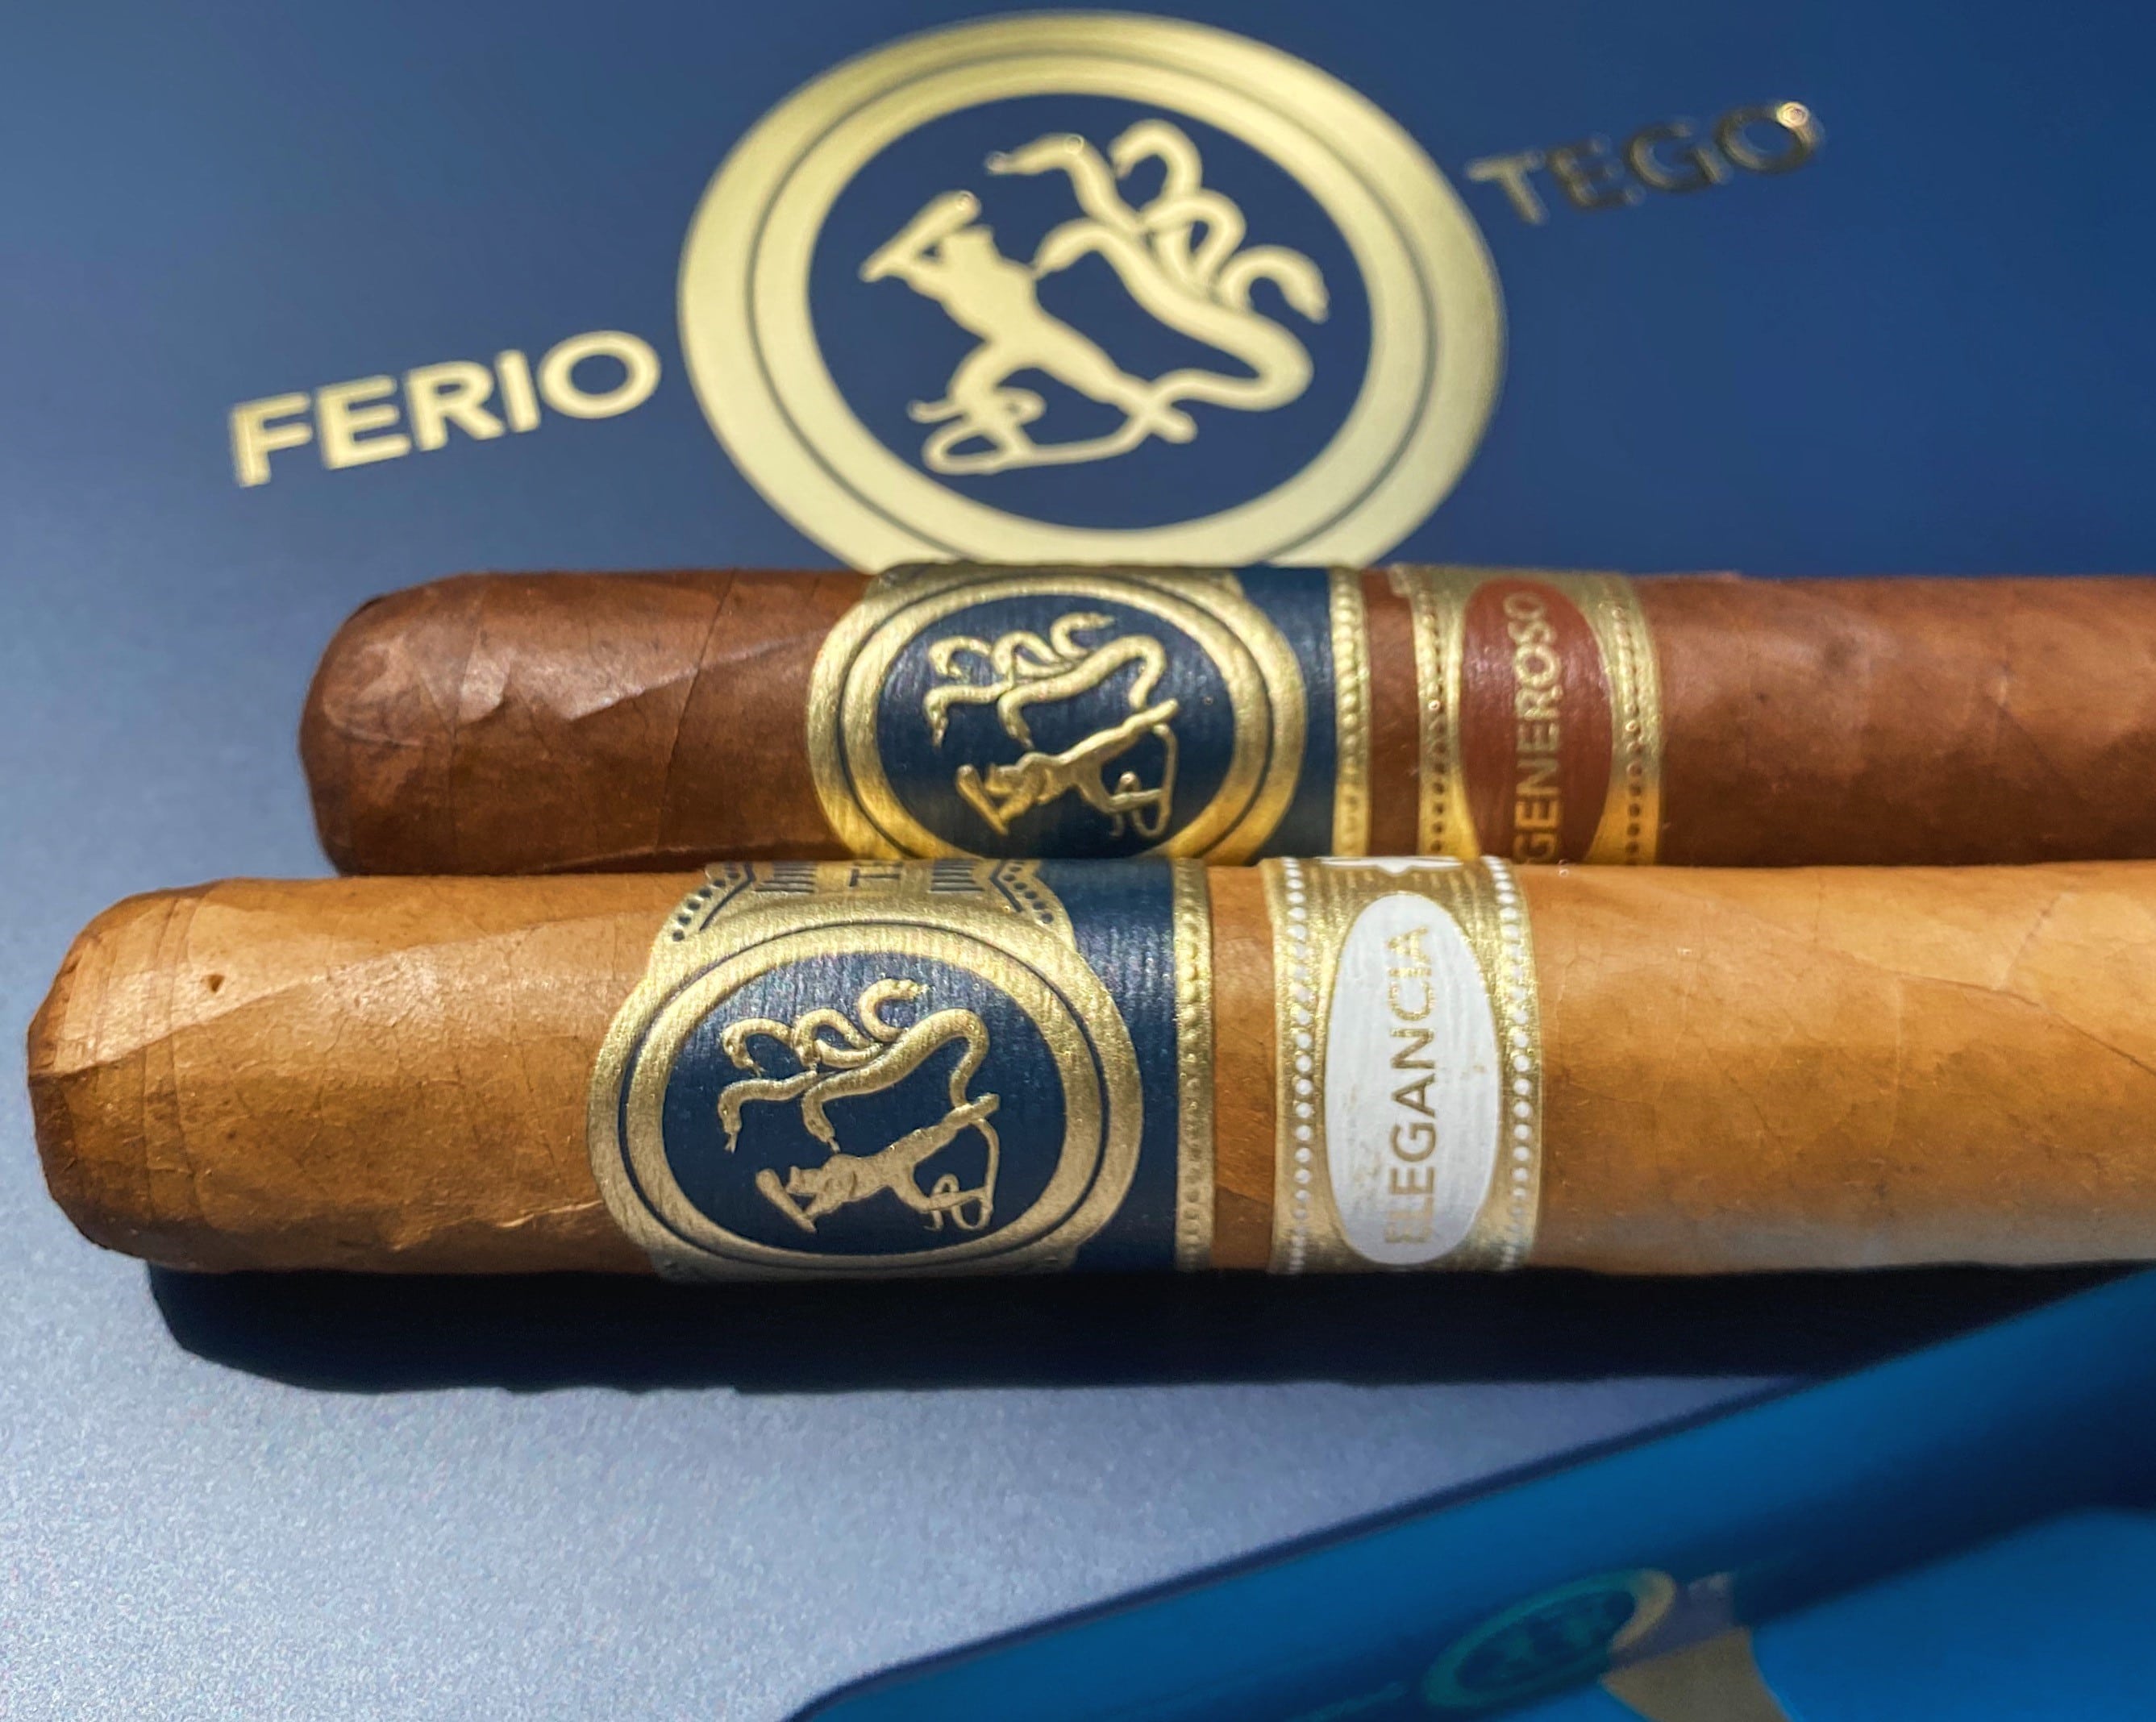 Ferio Tego Officially Launches with Two New Blends - Cigar News